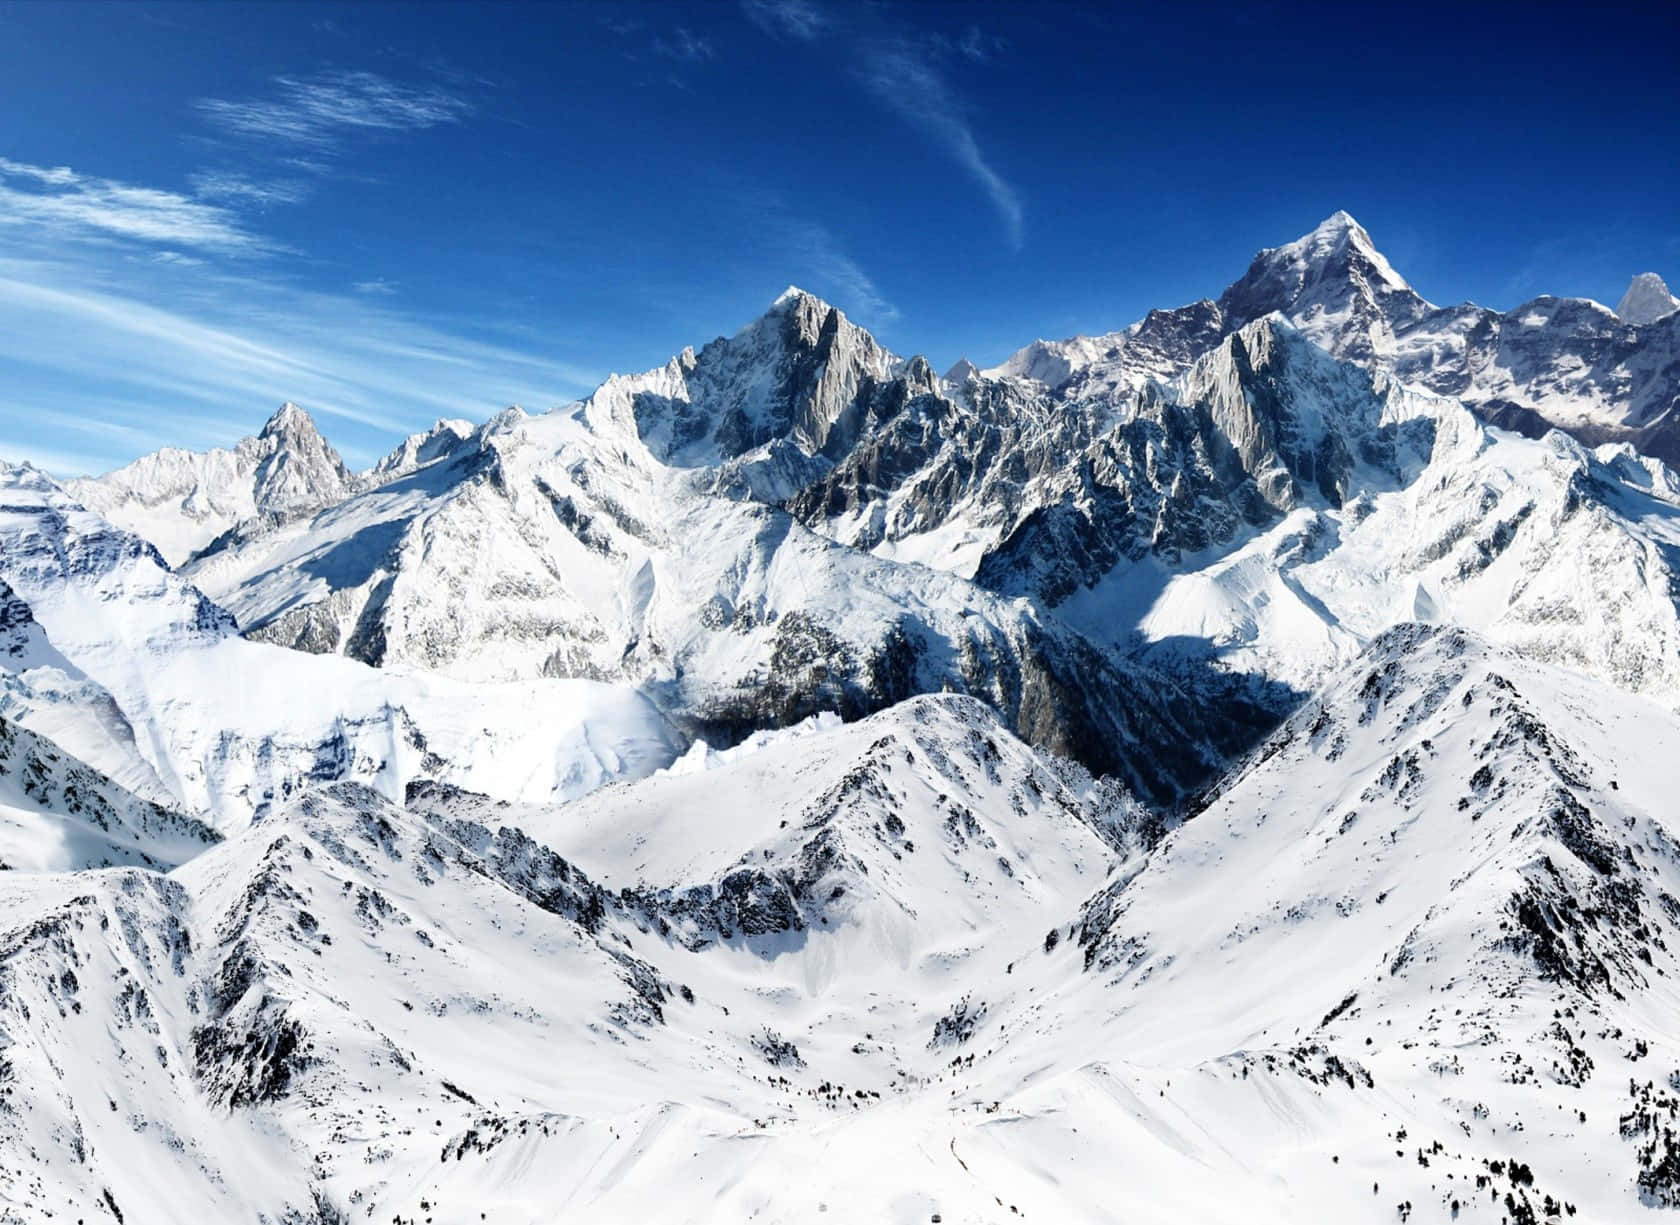 A stunning view of a snow-capped mountain range.